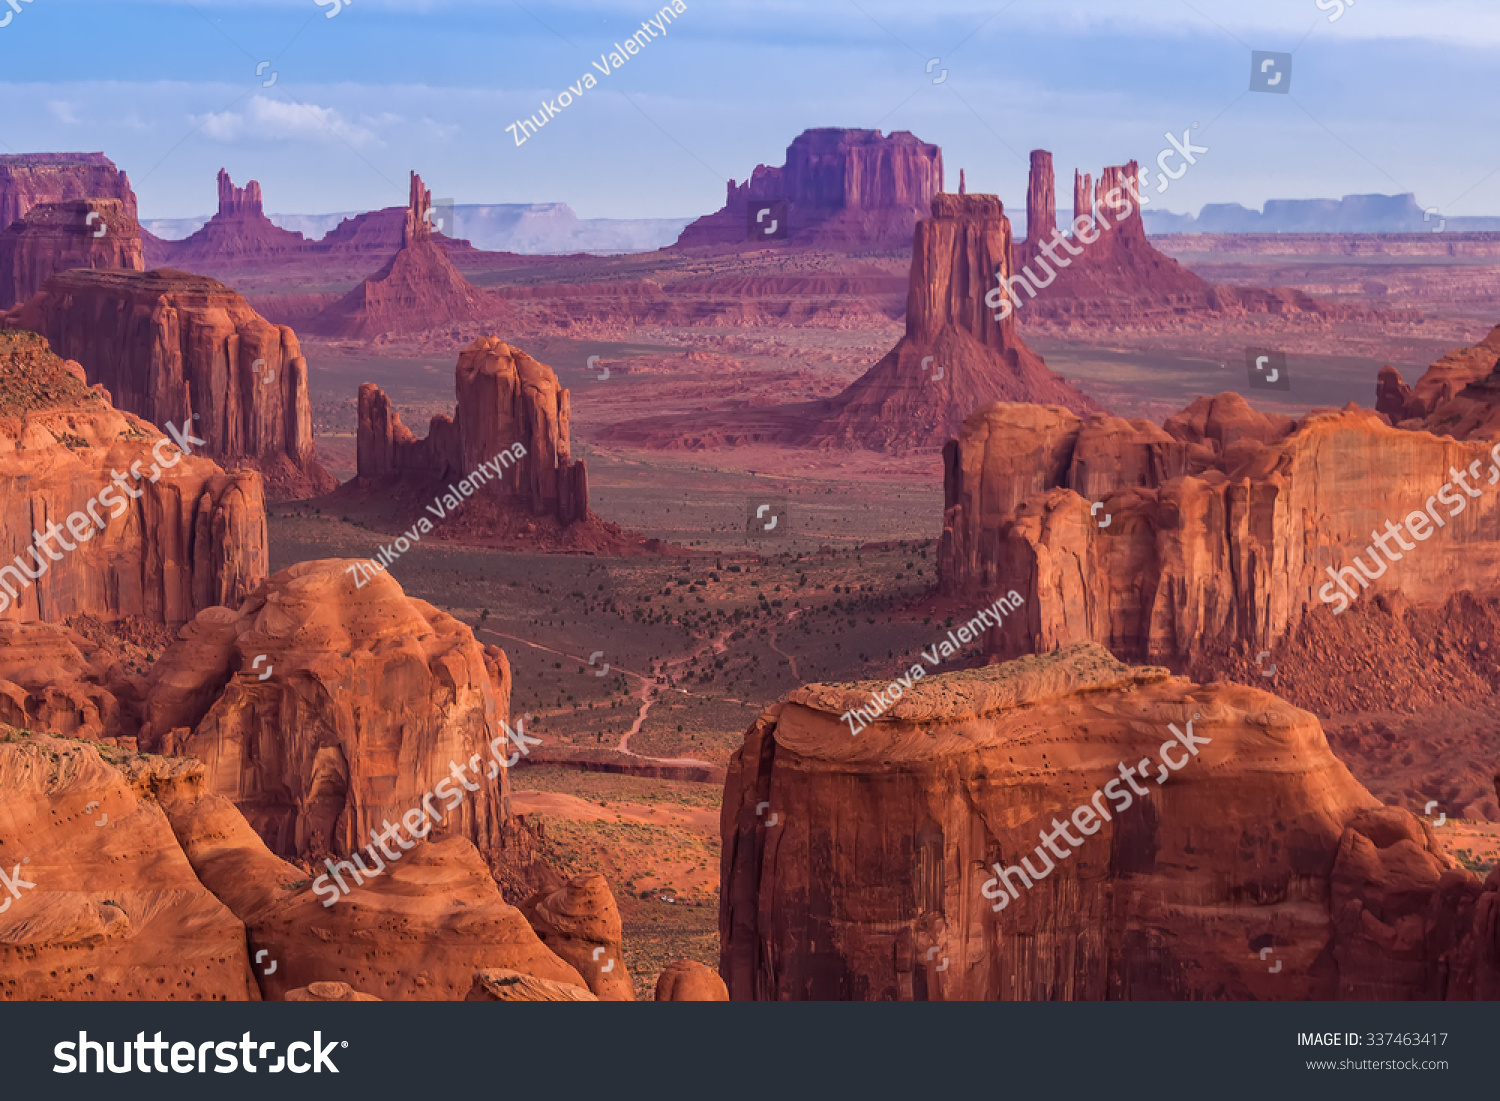 View from Hunts Mesa, Monument Valley, Arizona #337463417